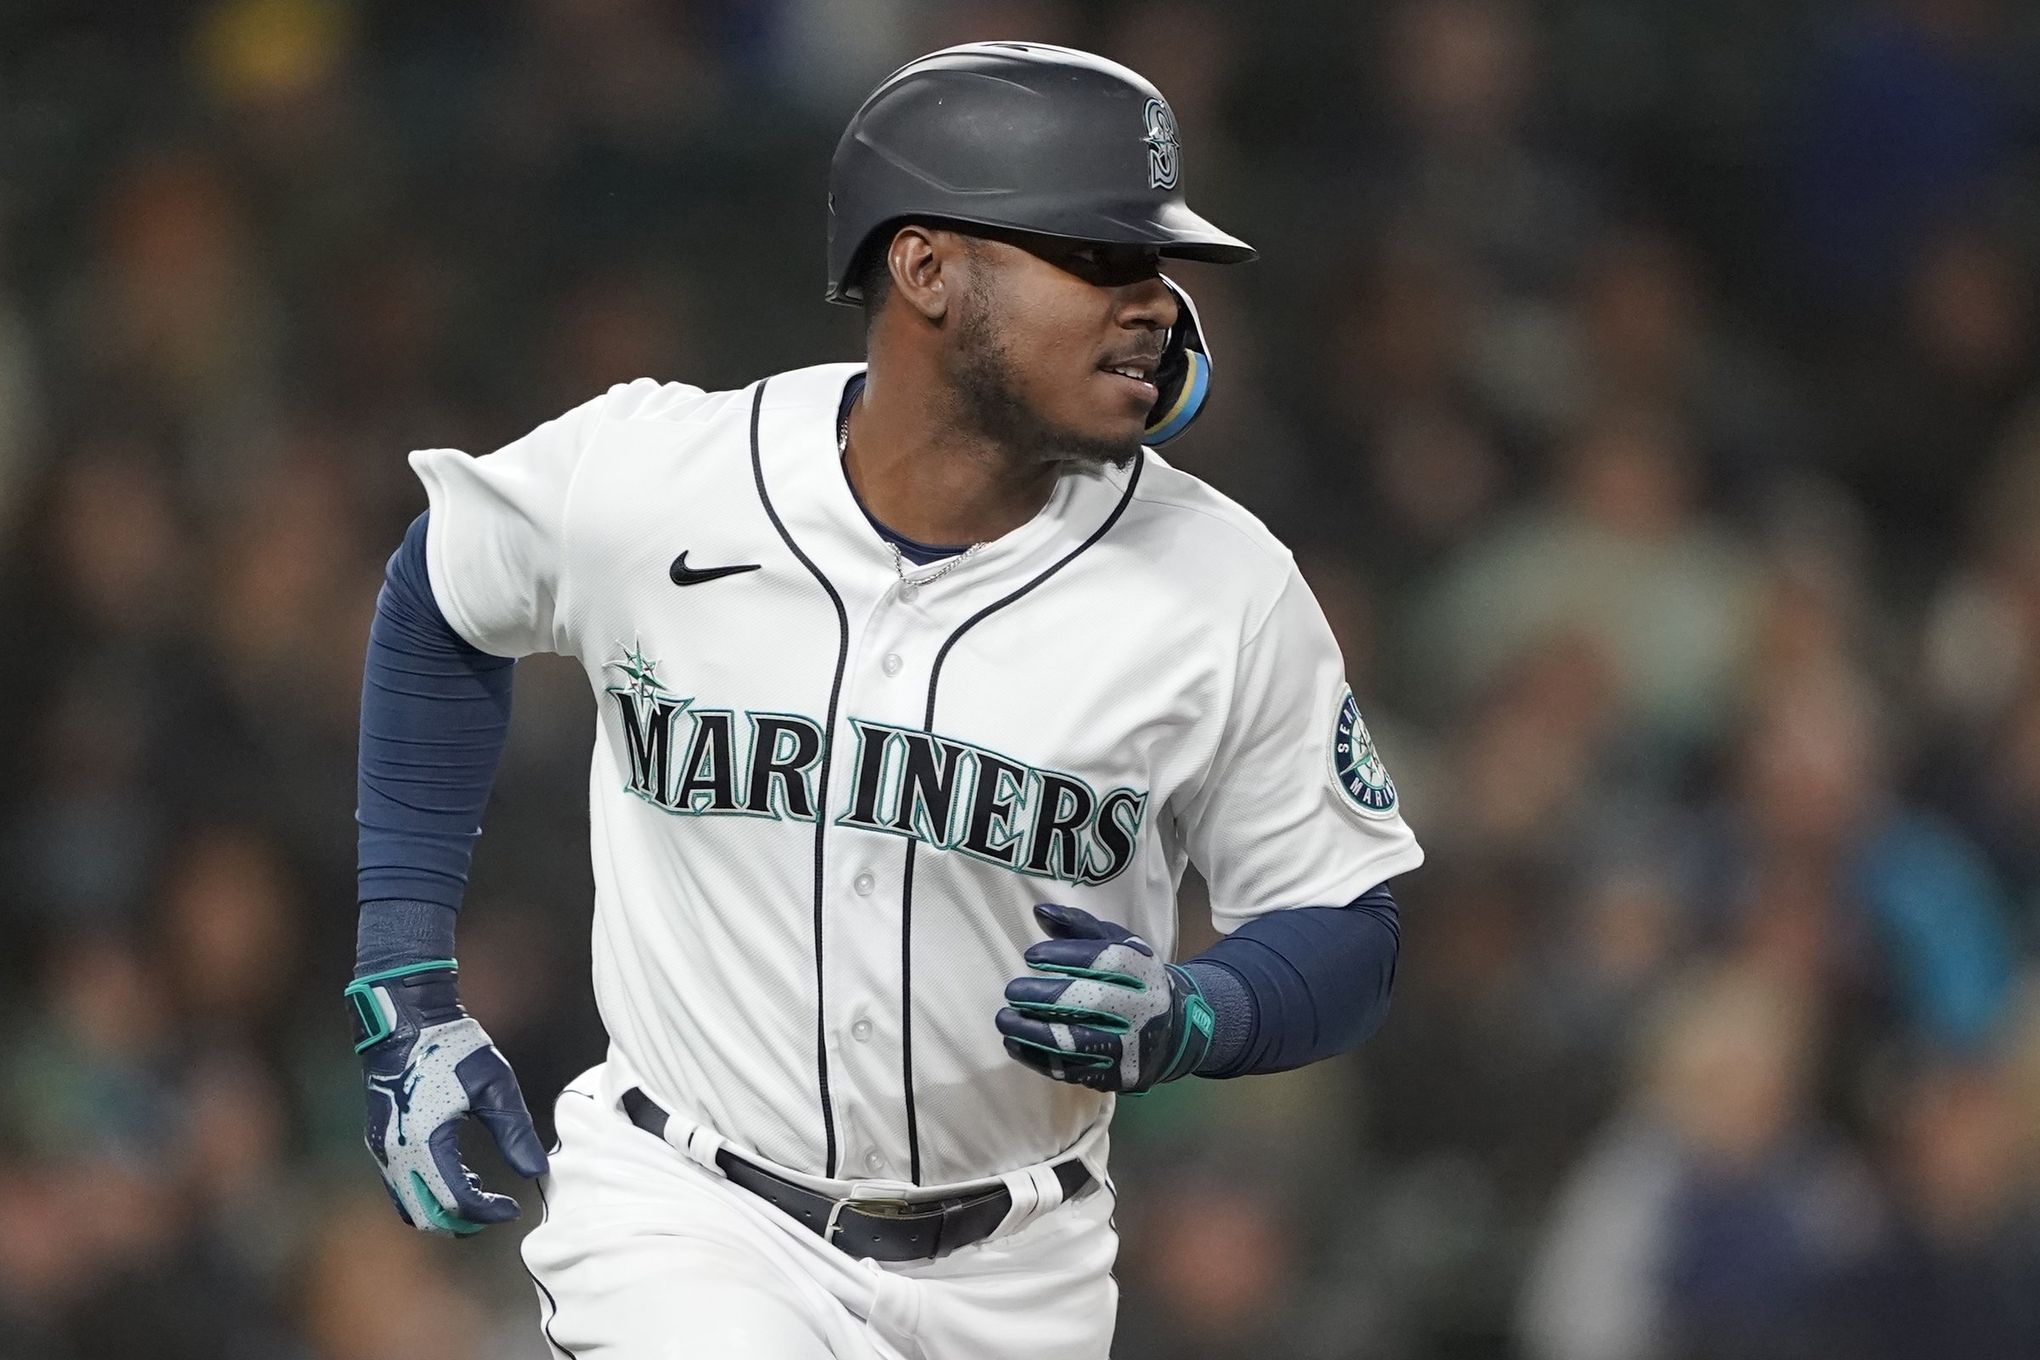 Mariners place Kyle Lewis on concussion injured list, activate Abraham Toro